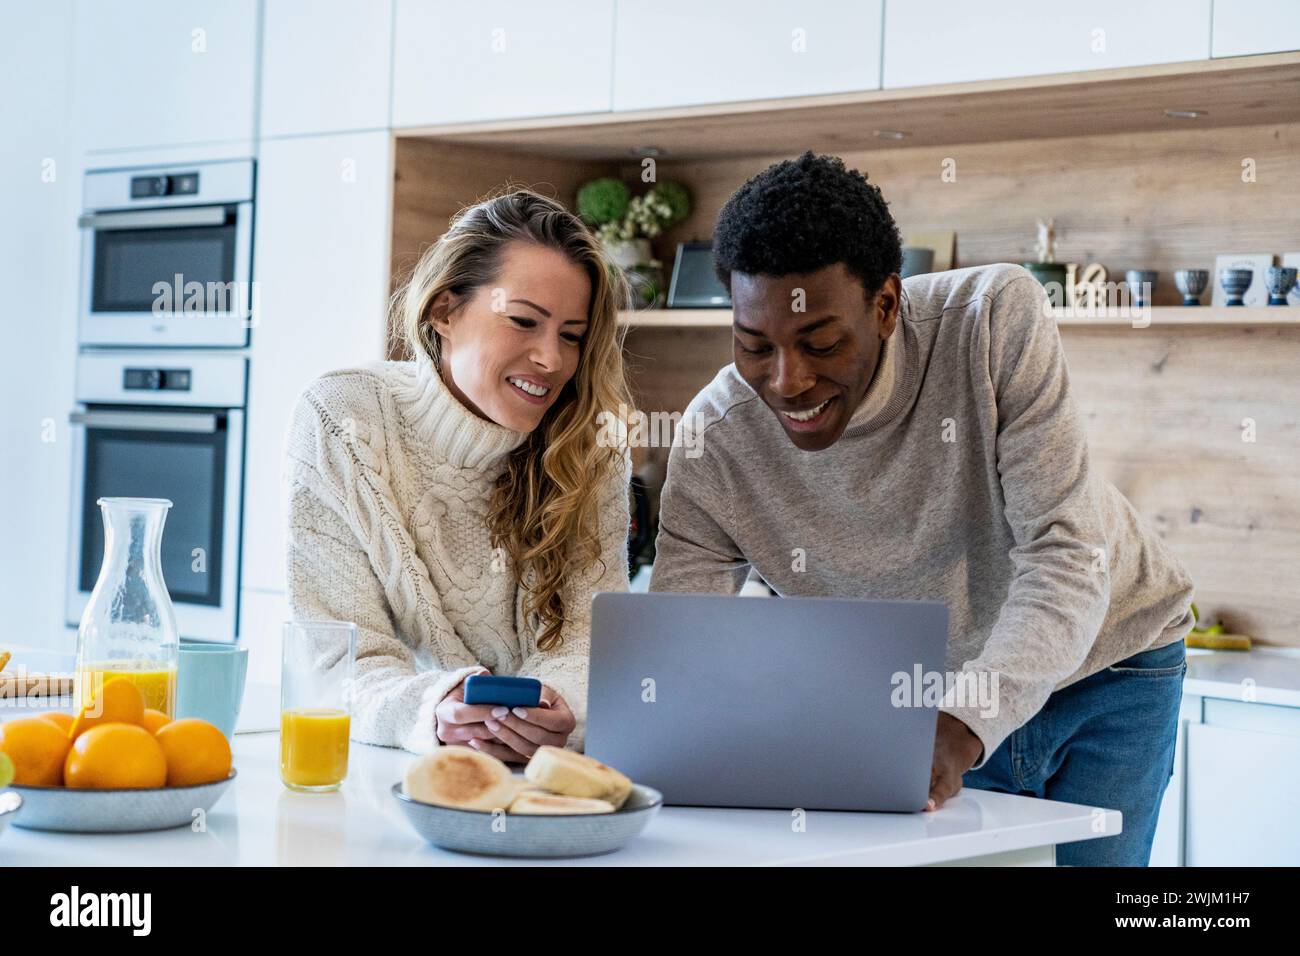 Cheerful adult couple using laptop together at kitchen counter Stock Photo